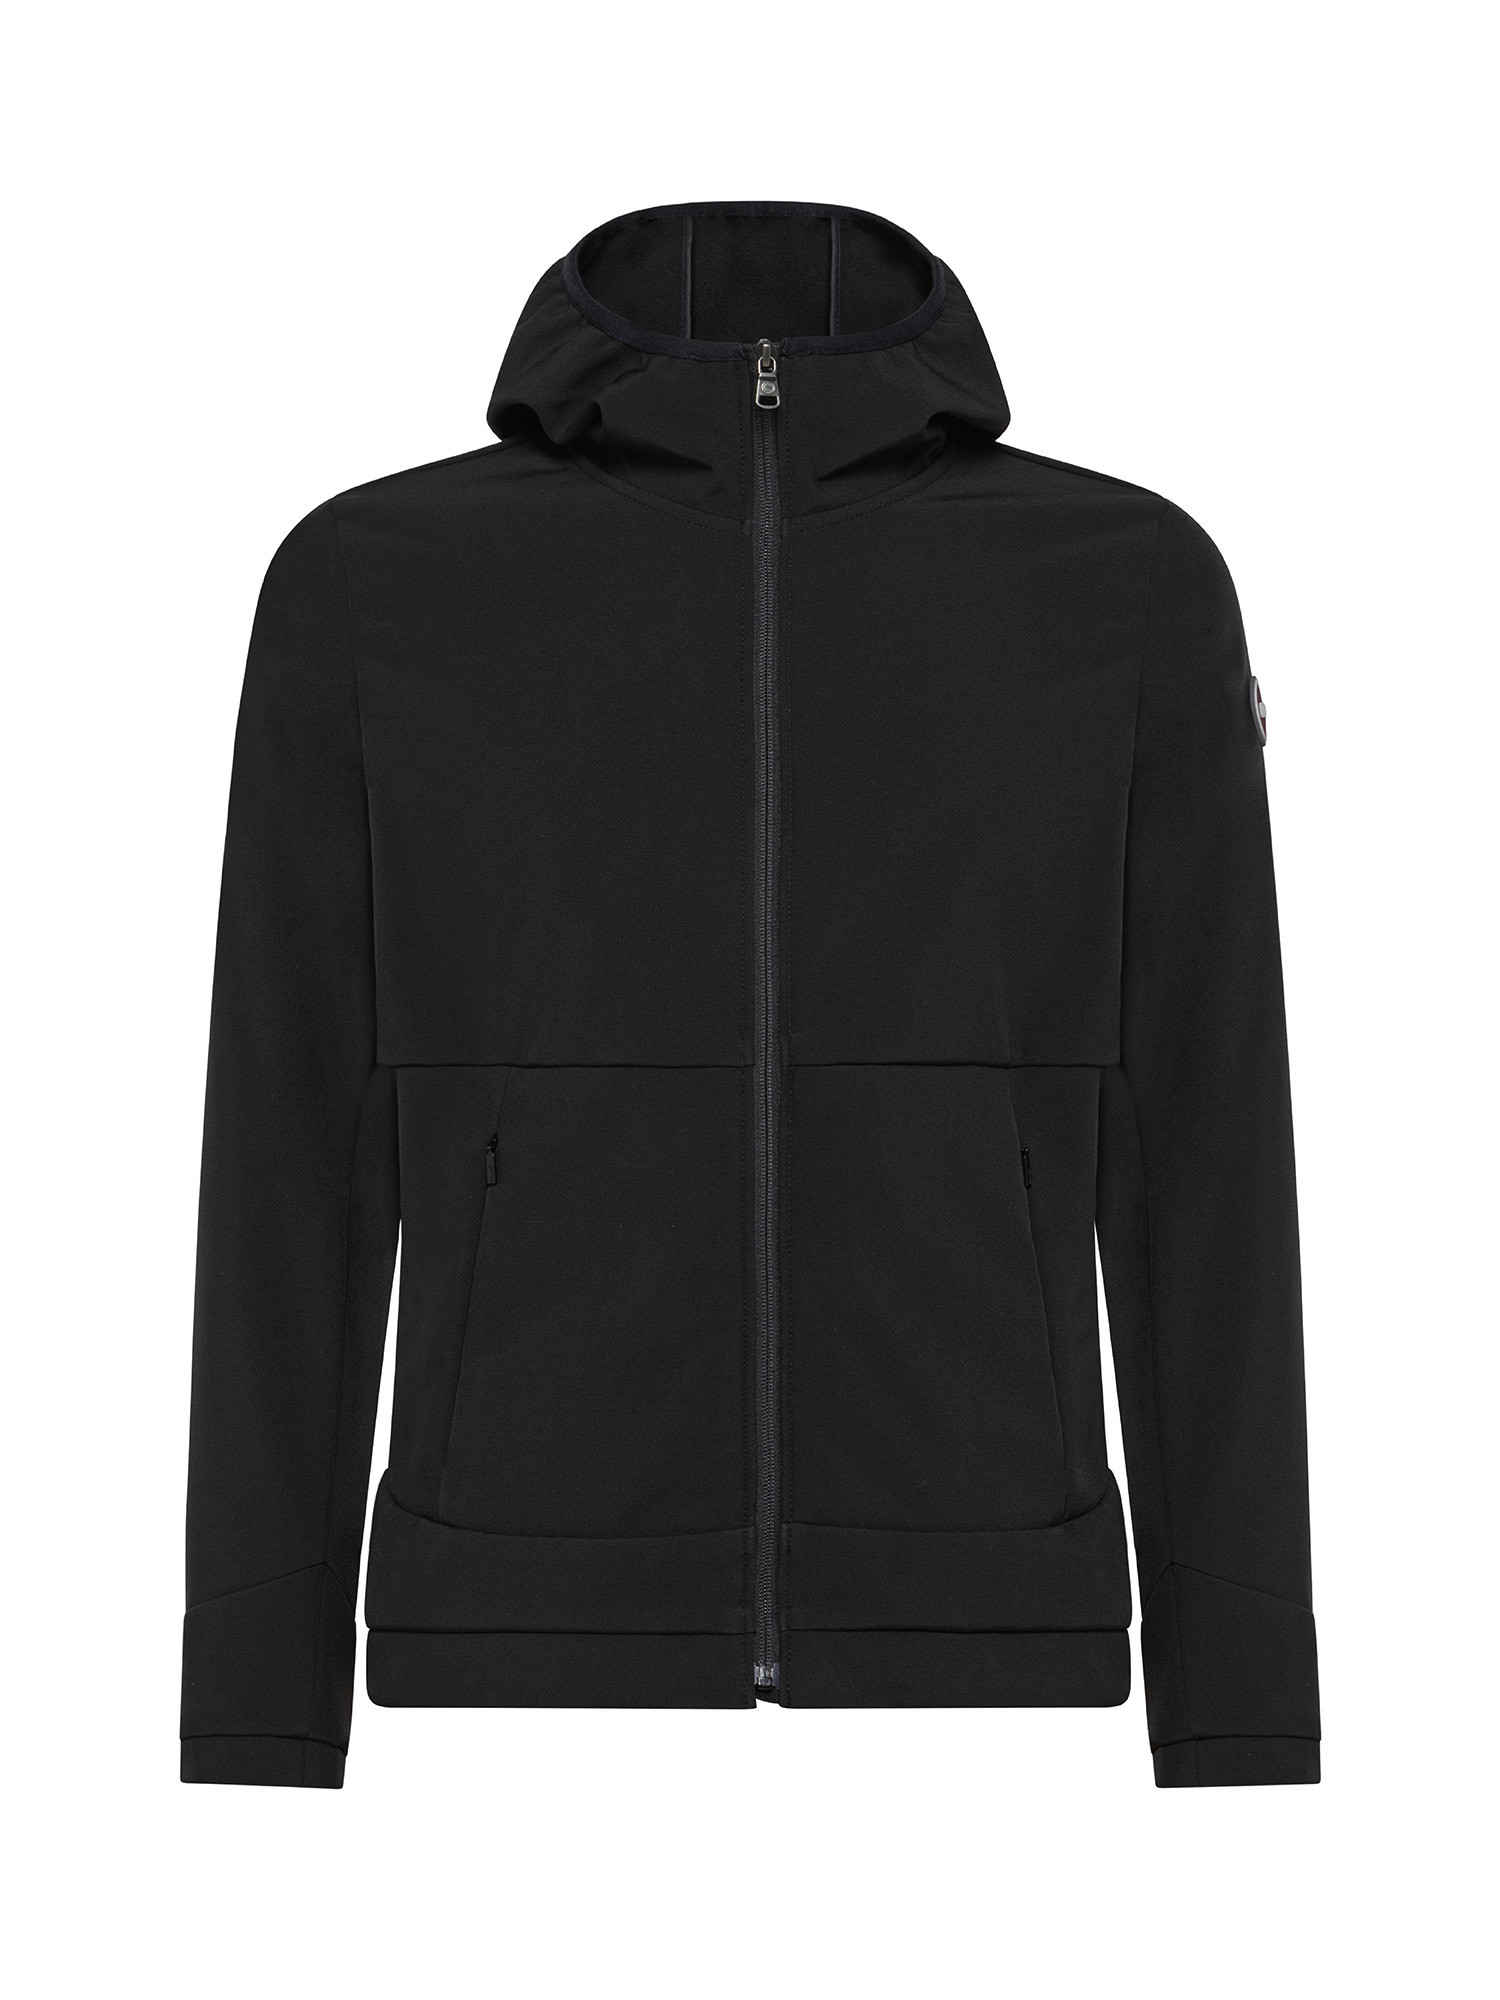 Hoodie jacket in soft three-layer fabric, Black, large image number 0